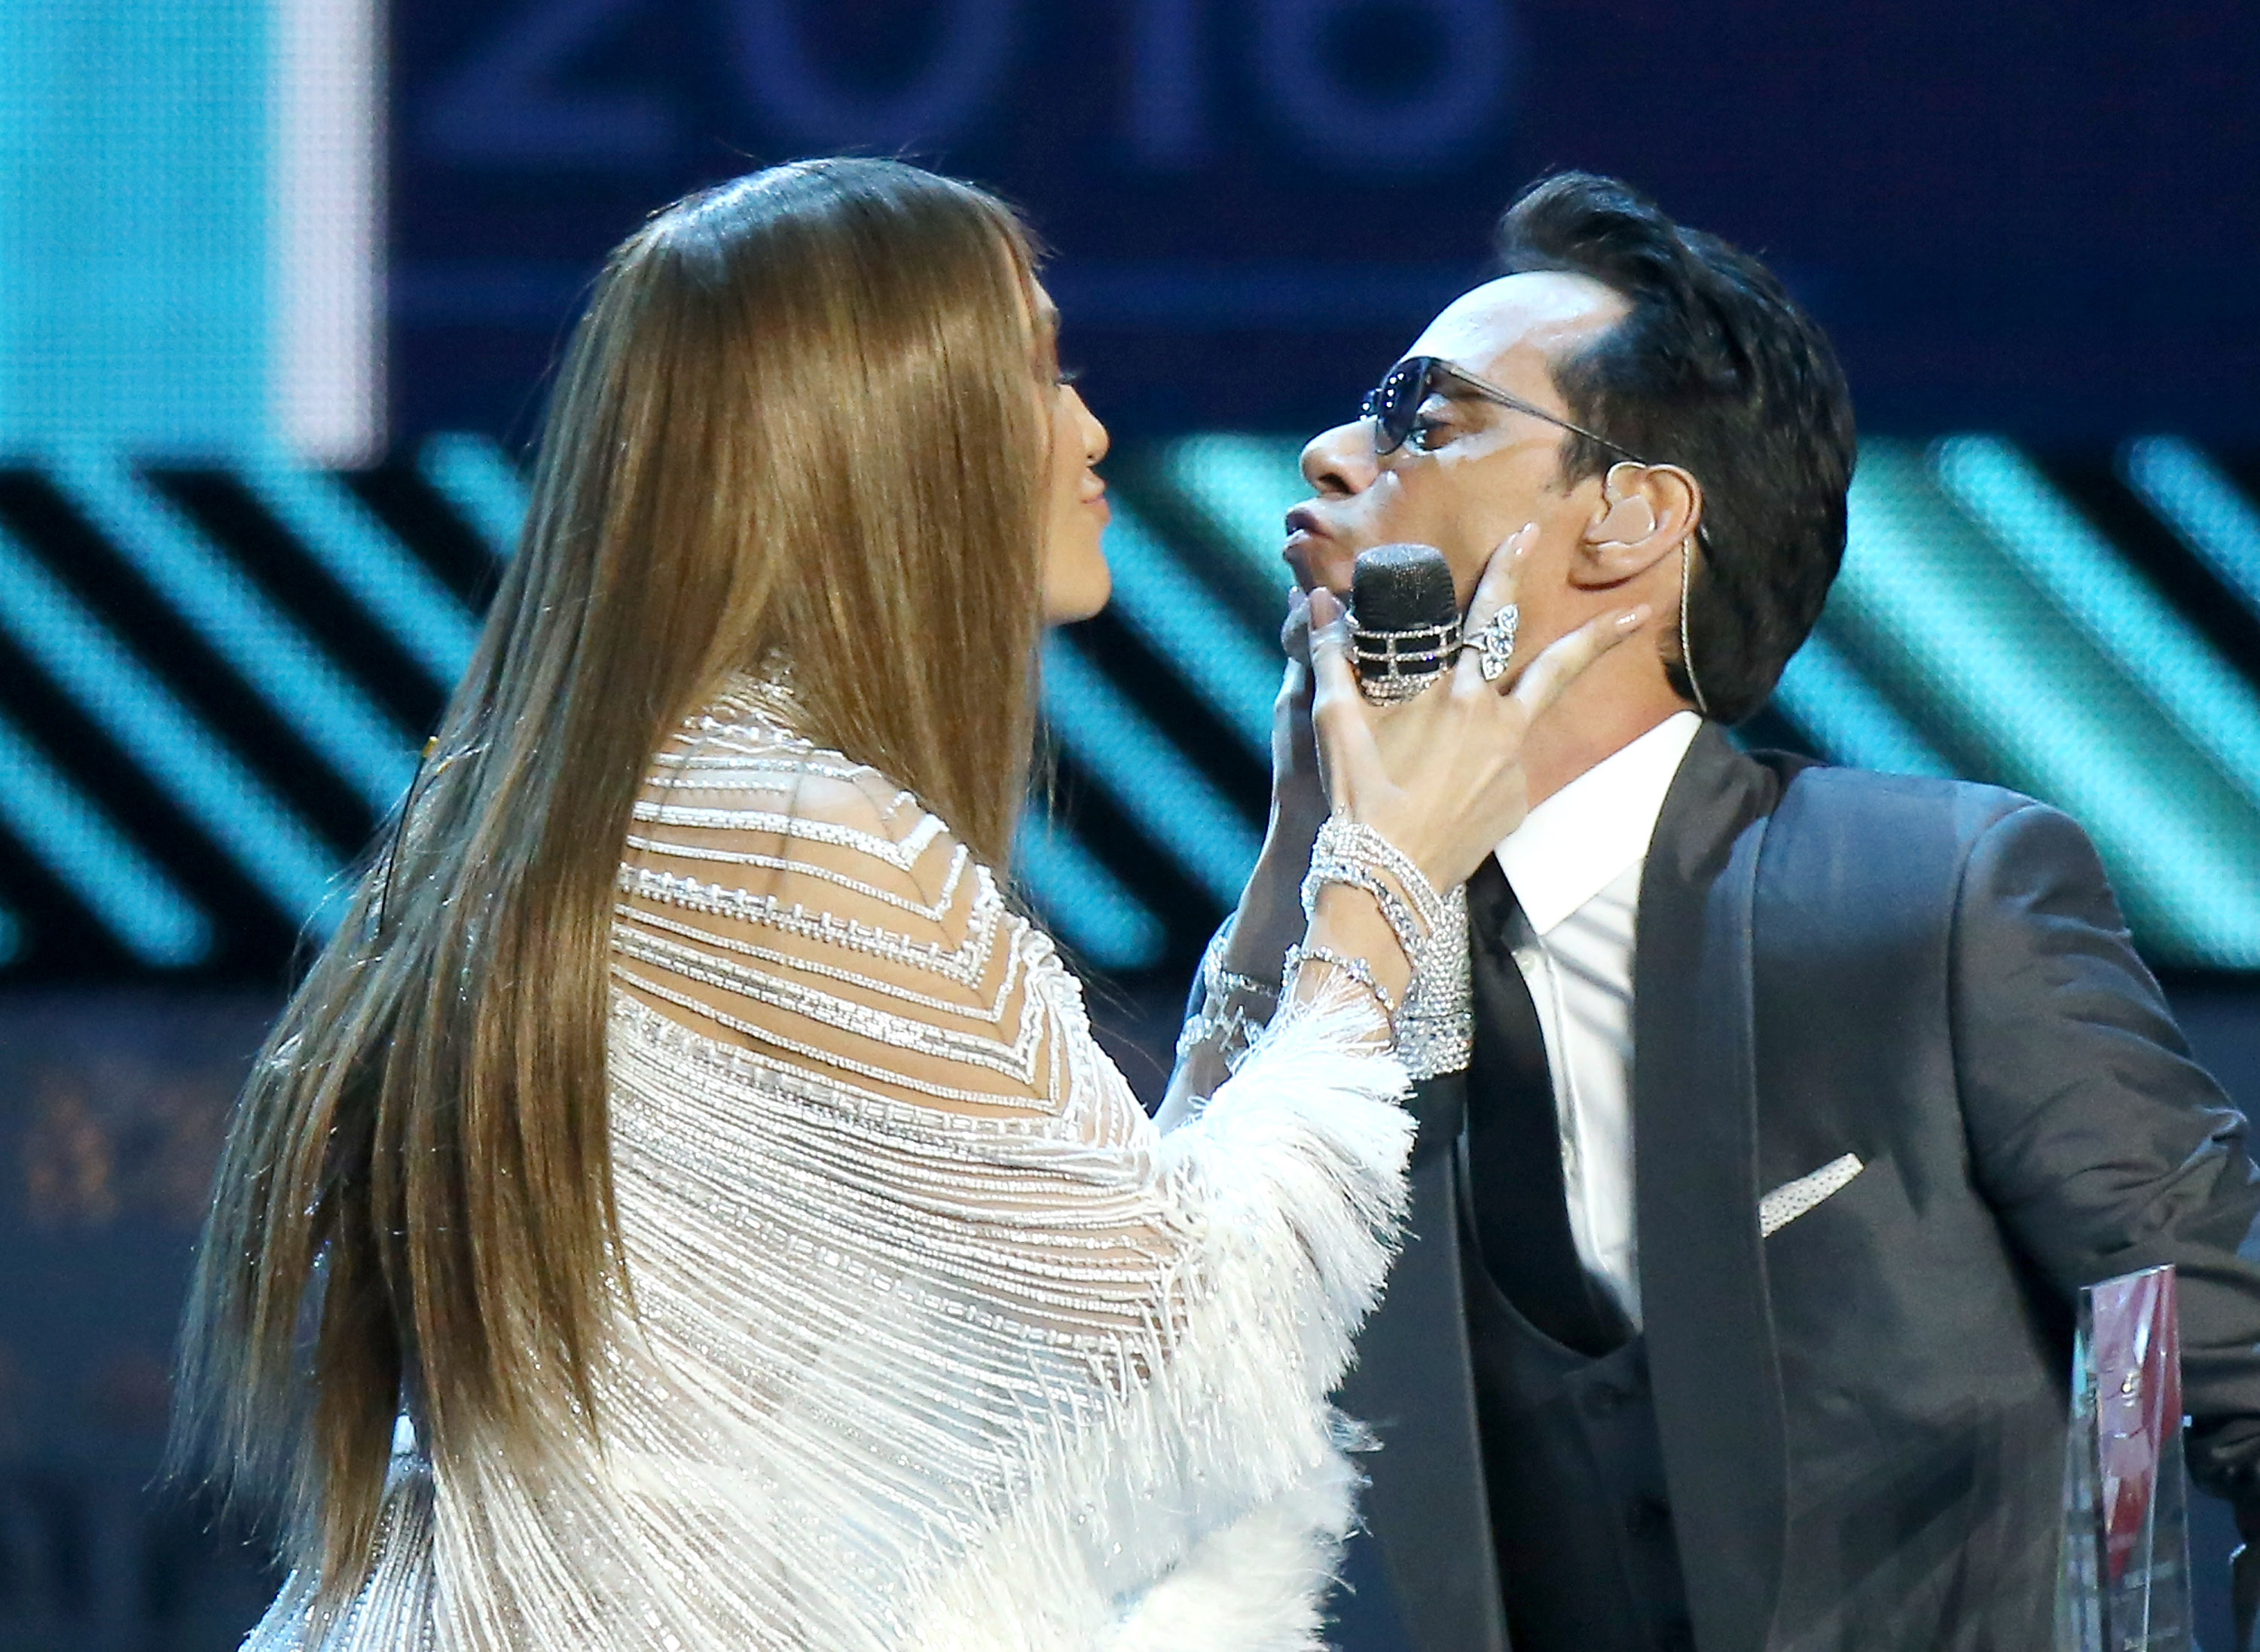 Jennifer Lopez and Marc Anthony perform onstage during the 17th Annual Latin Grammy Awards held at T-Mobile Arena in Las Vegas, Nevada on November 17, 2016. | Source: Getty Images